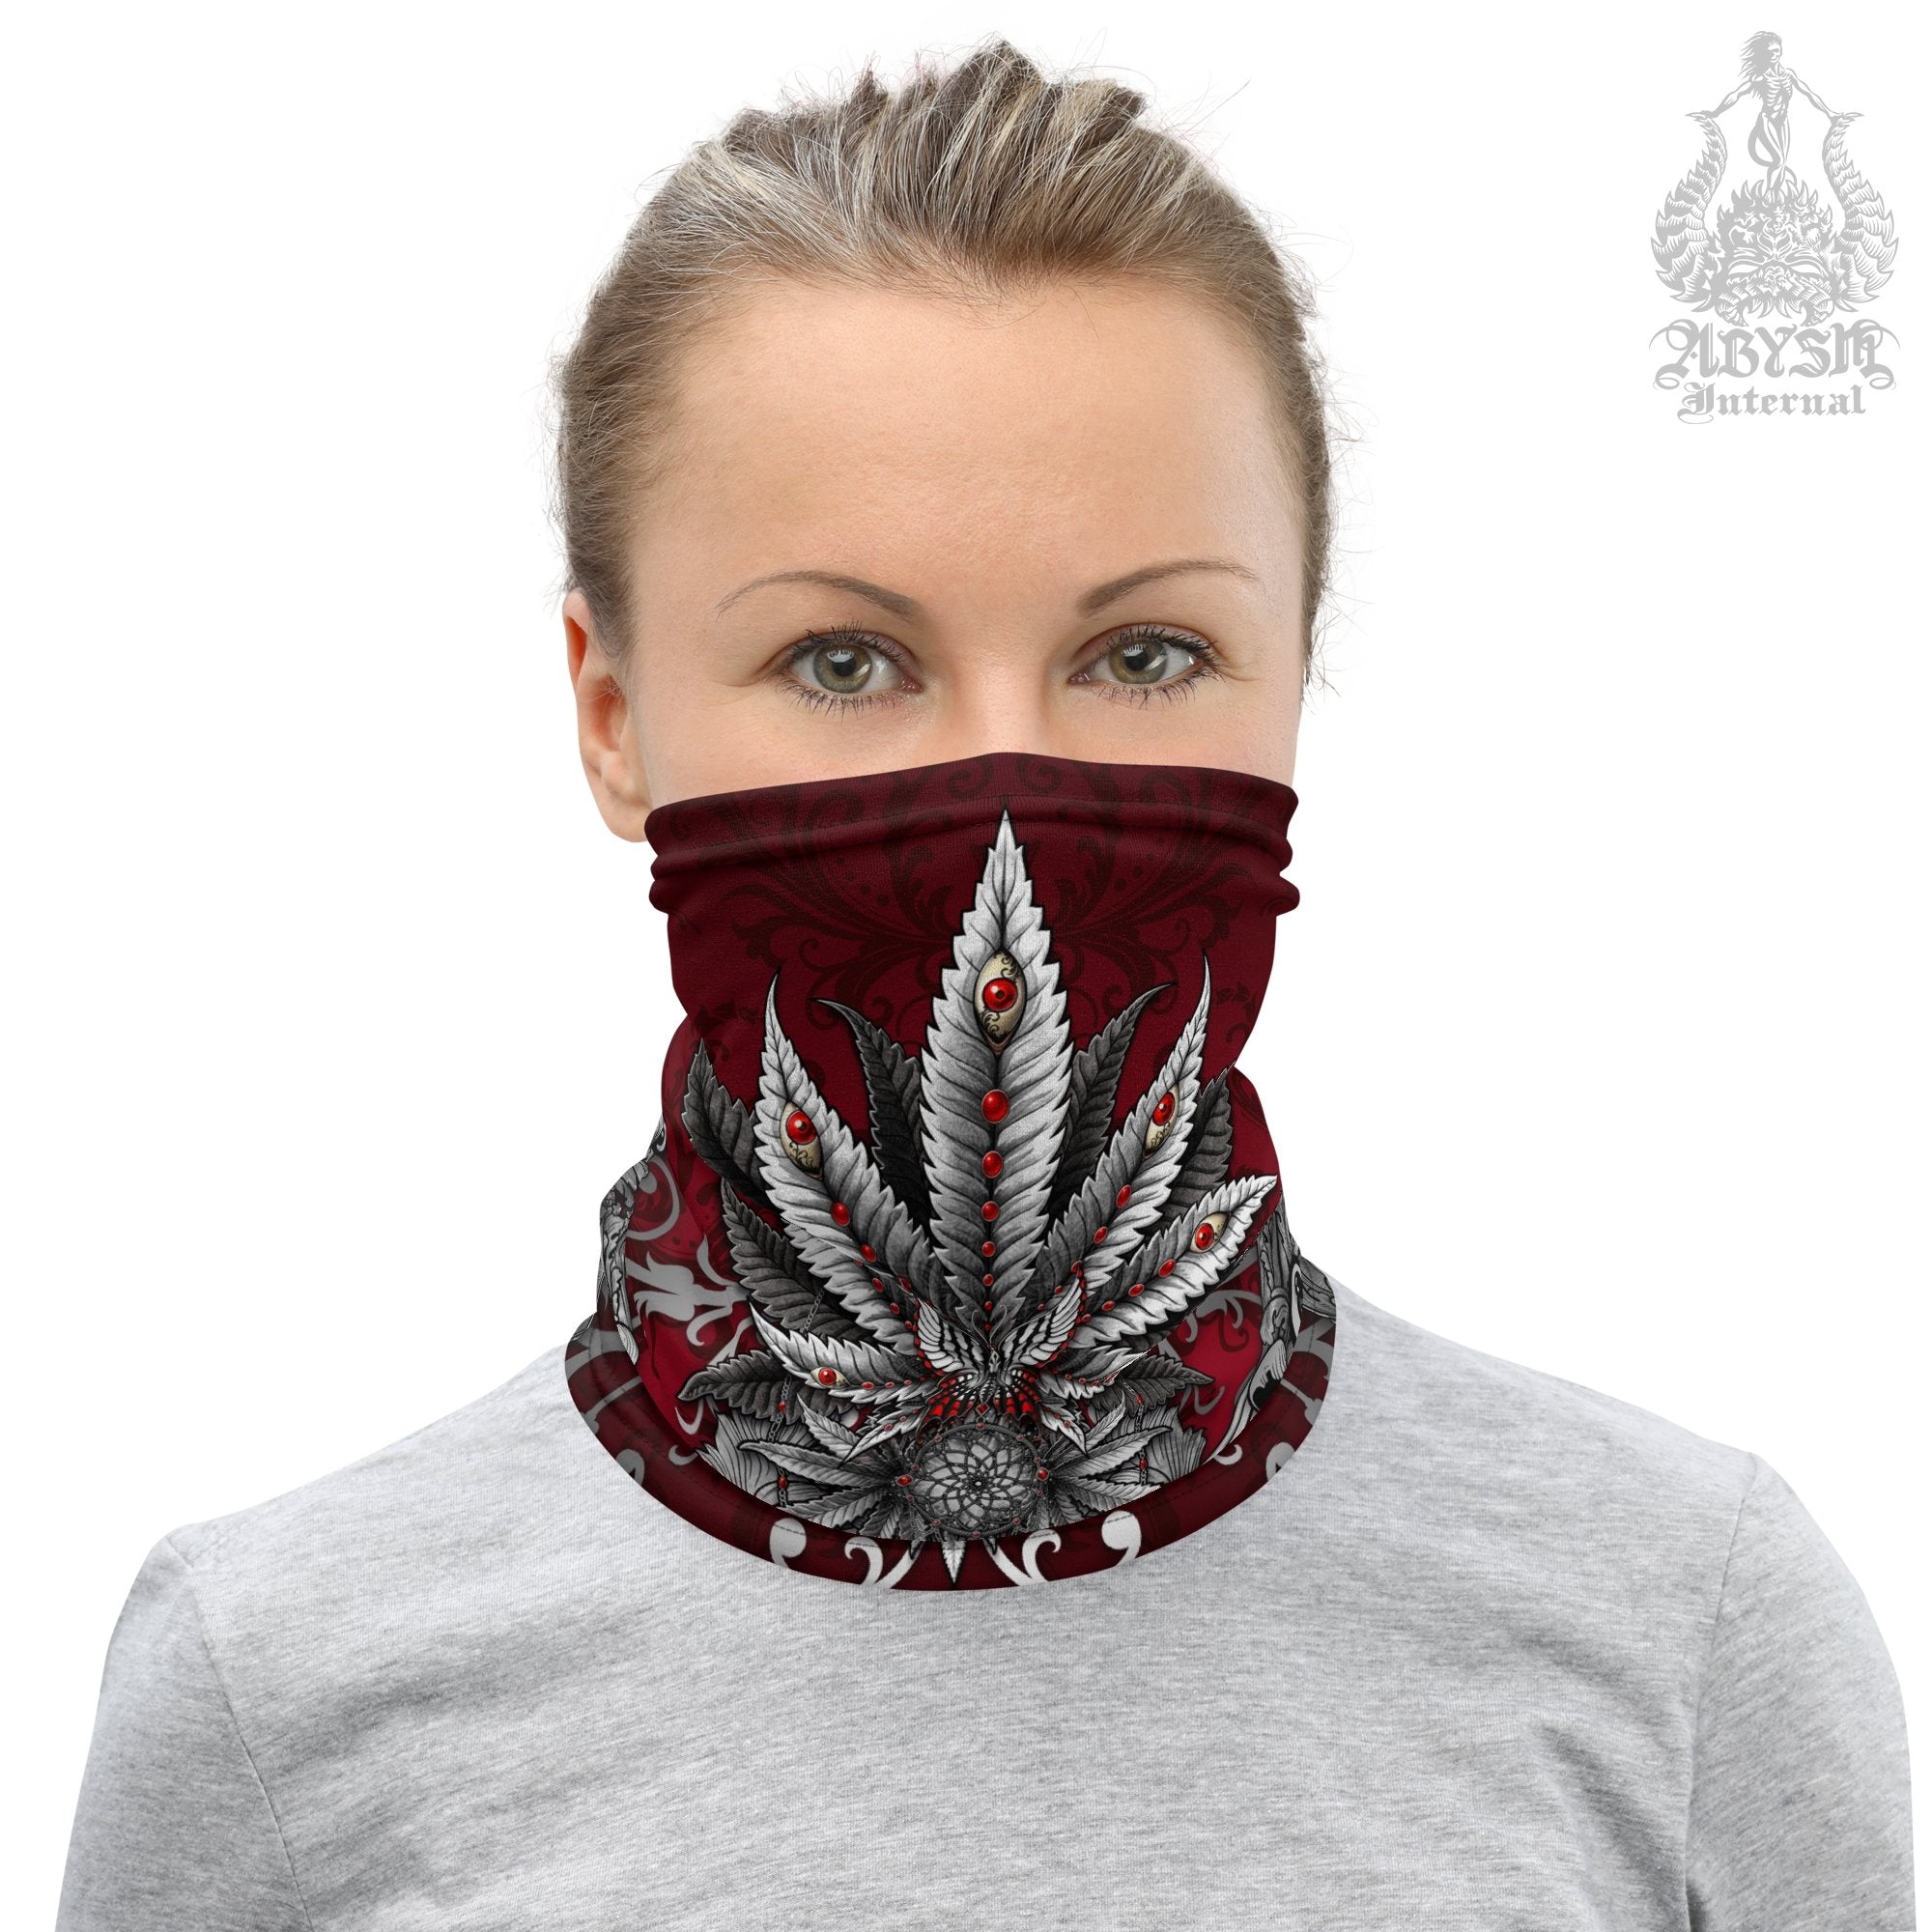 Silver Cannabis Neck Gaiter, Weed Face Mask, Marijuana Head Covering, Outdoors Festival Outfit, 420 Gift - Abysm Internal